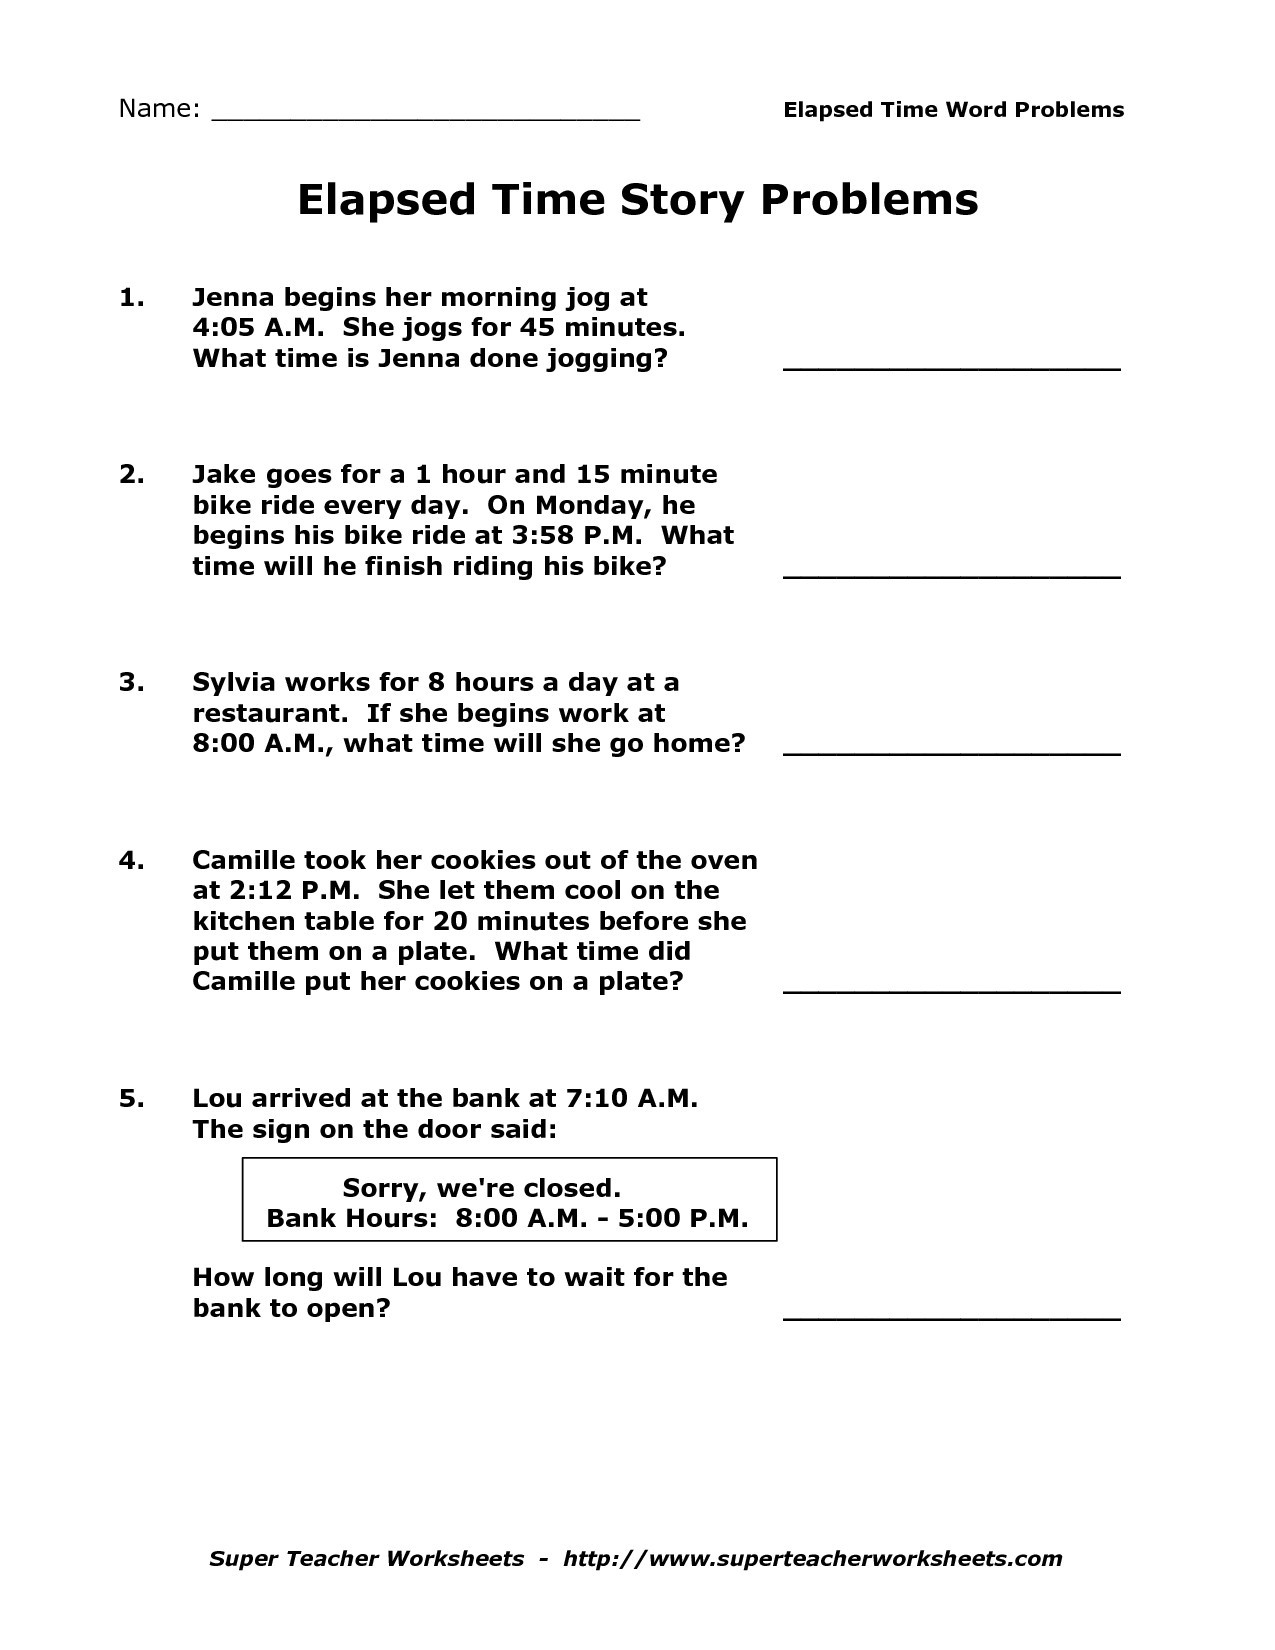 Elapsed Time Worksheets 3Rd Grade To Learning - Math Worksheet For Kids - Elapsed Time Worksheets Free Printable